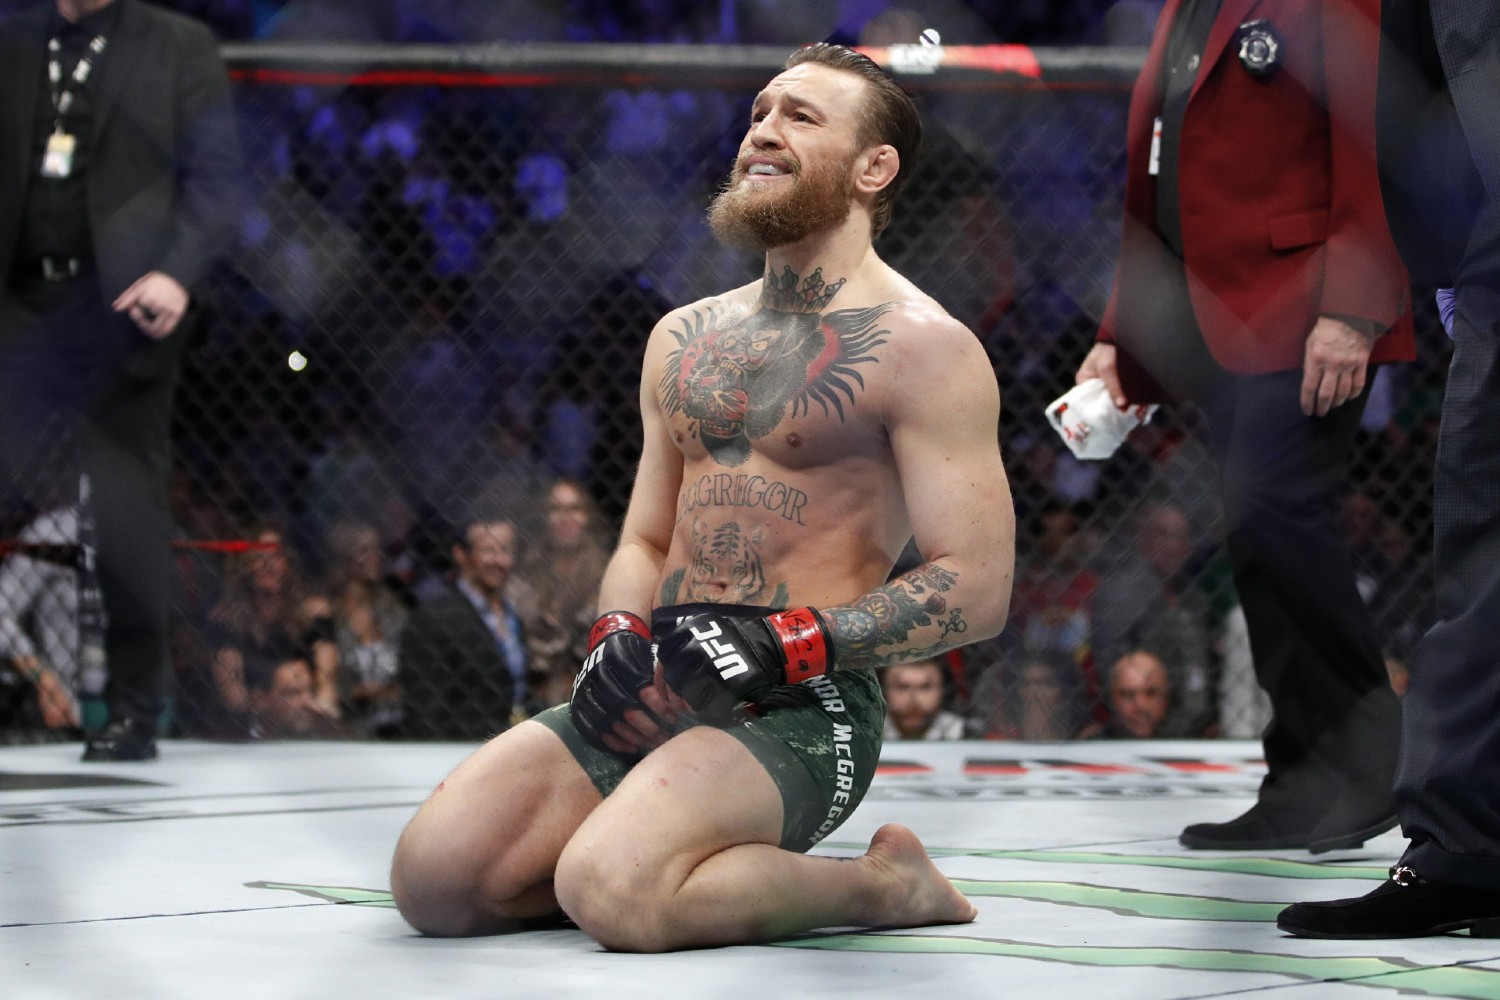 His next match When is Conor McGregor's comeback fight? Film Daily